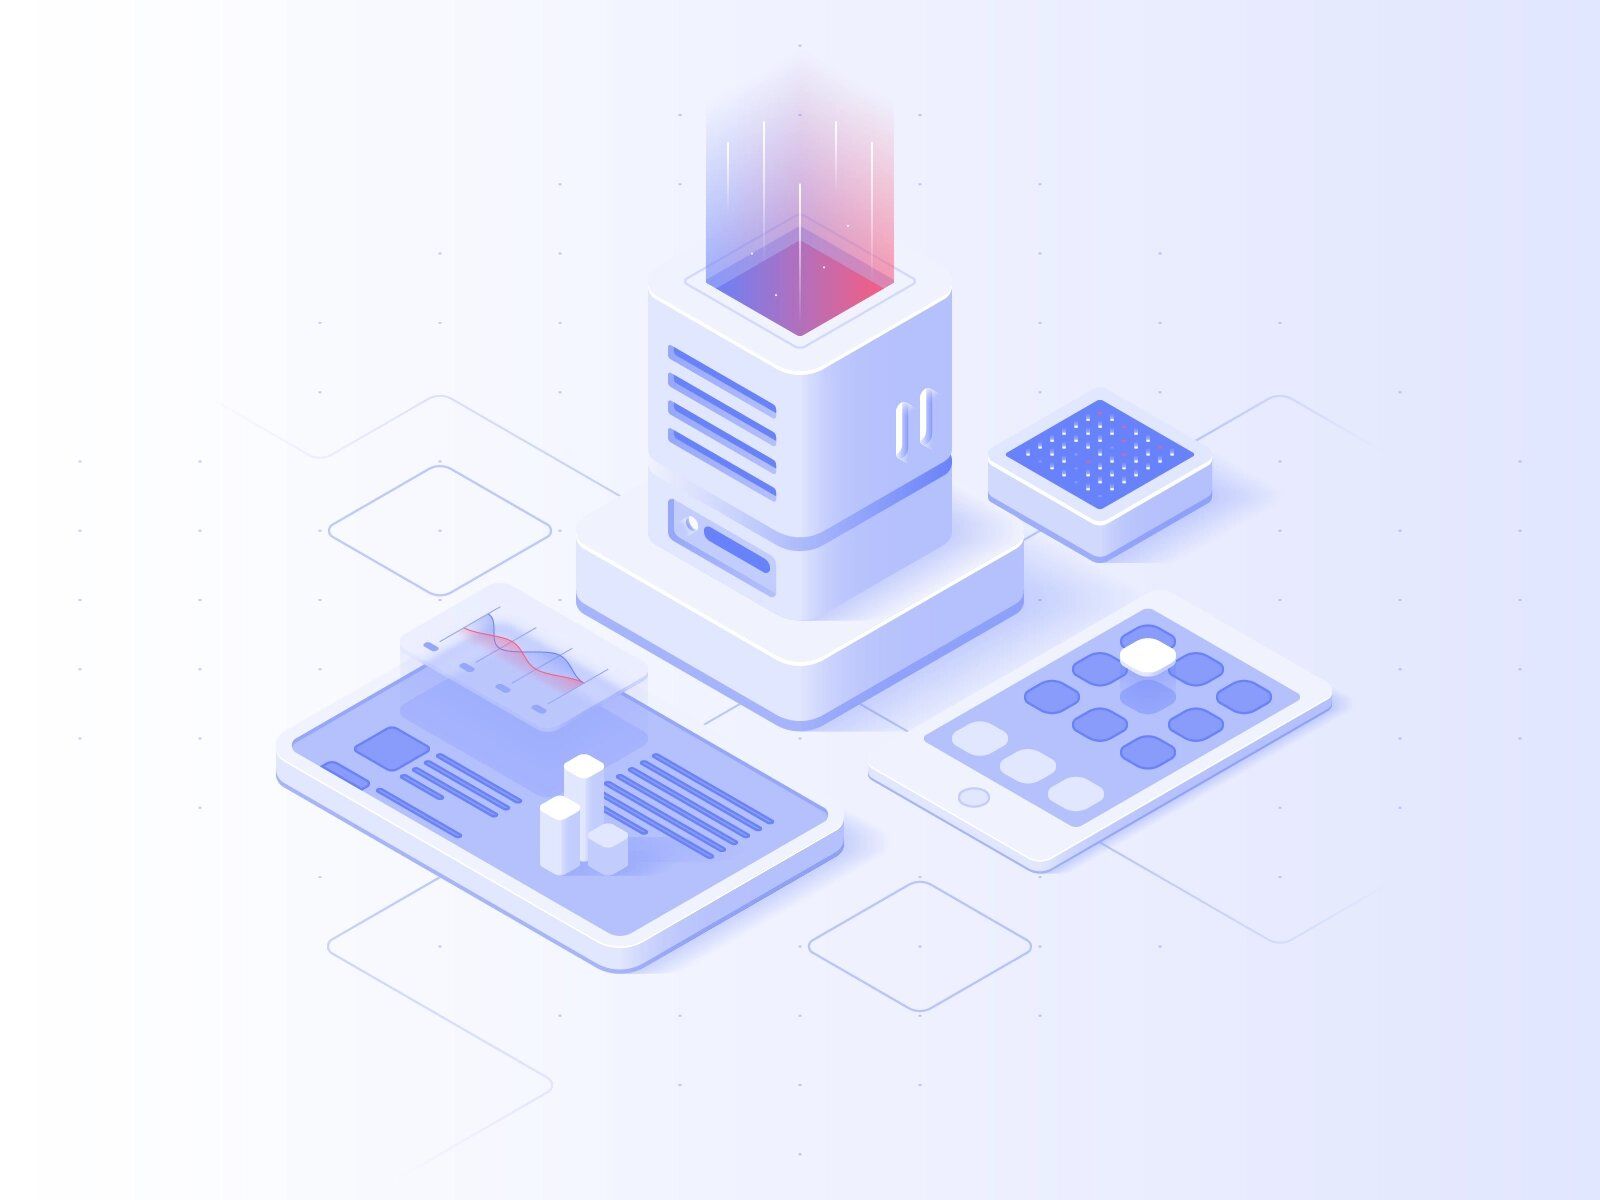 You can use serverless computing (FaaS) along with service of cloud providers for any product (*image by [Martín Priotti](https://dribbble.com/mpriotti){ rel="nofollow" target="_blank" .default-md}*)